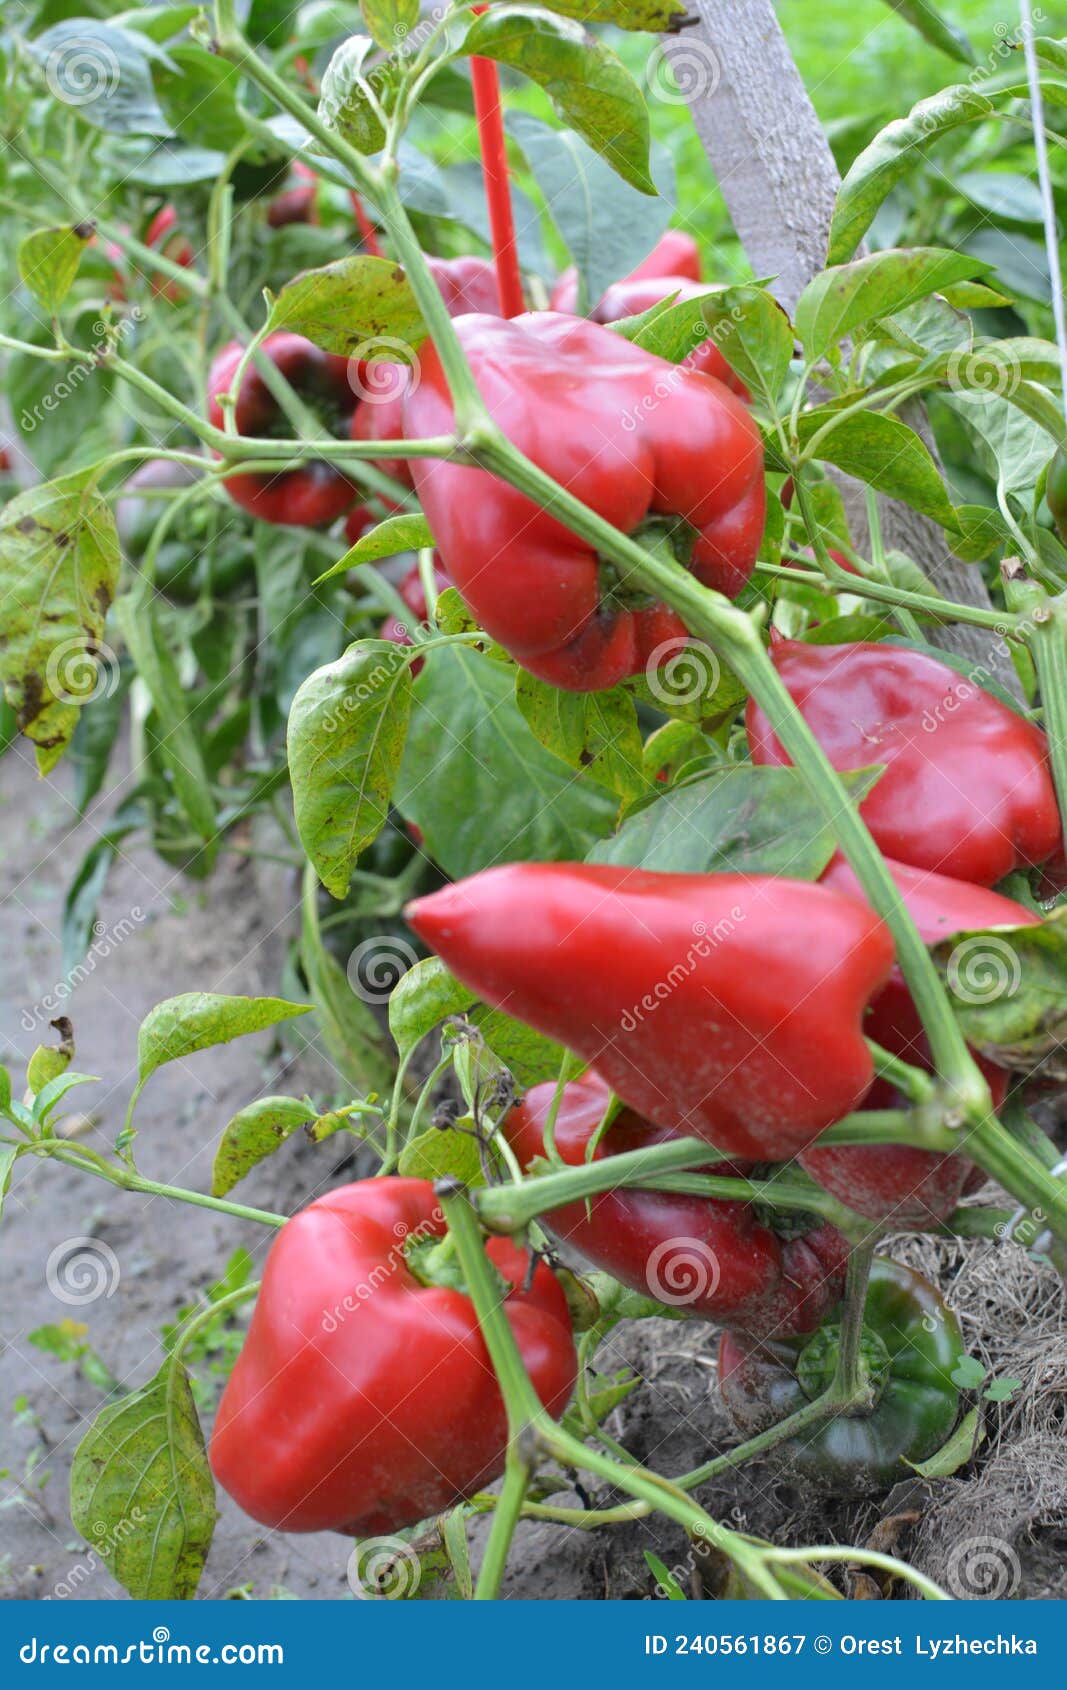 The Fruits Of Sweet Pepper Ripened On The Bush Stock Image Image Of